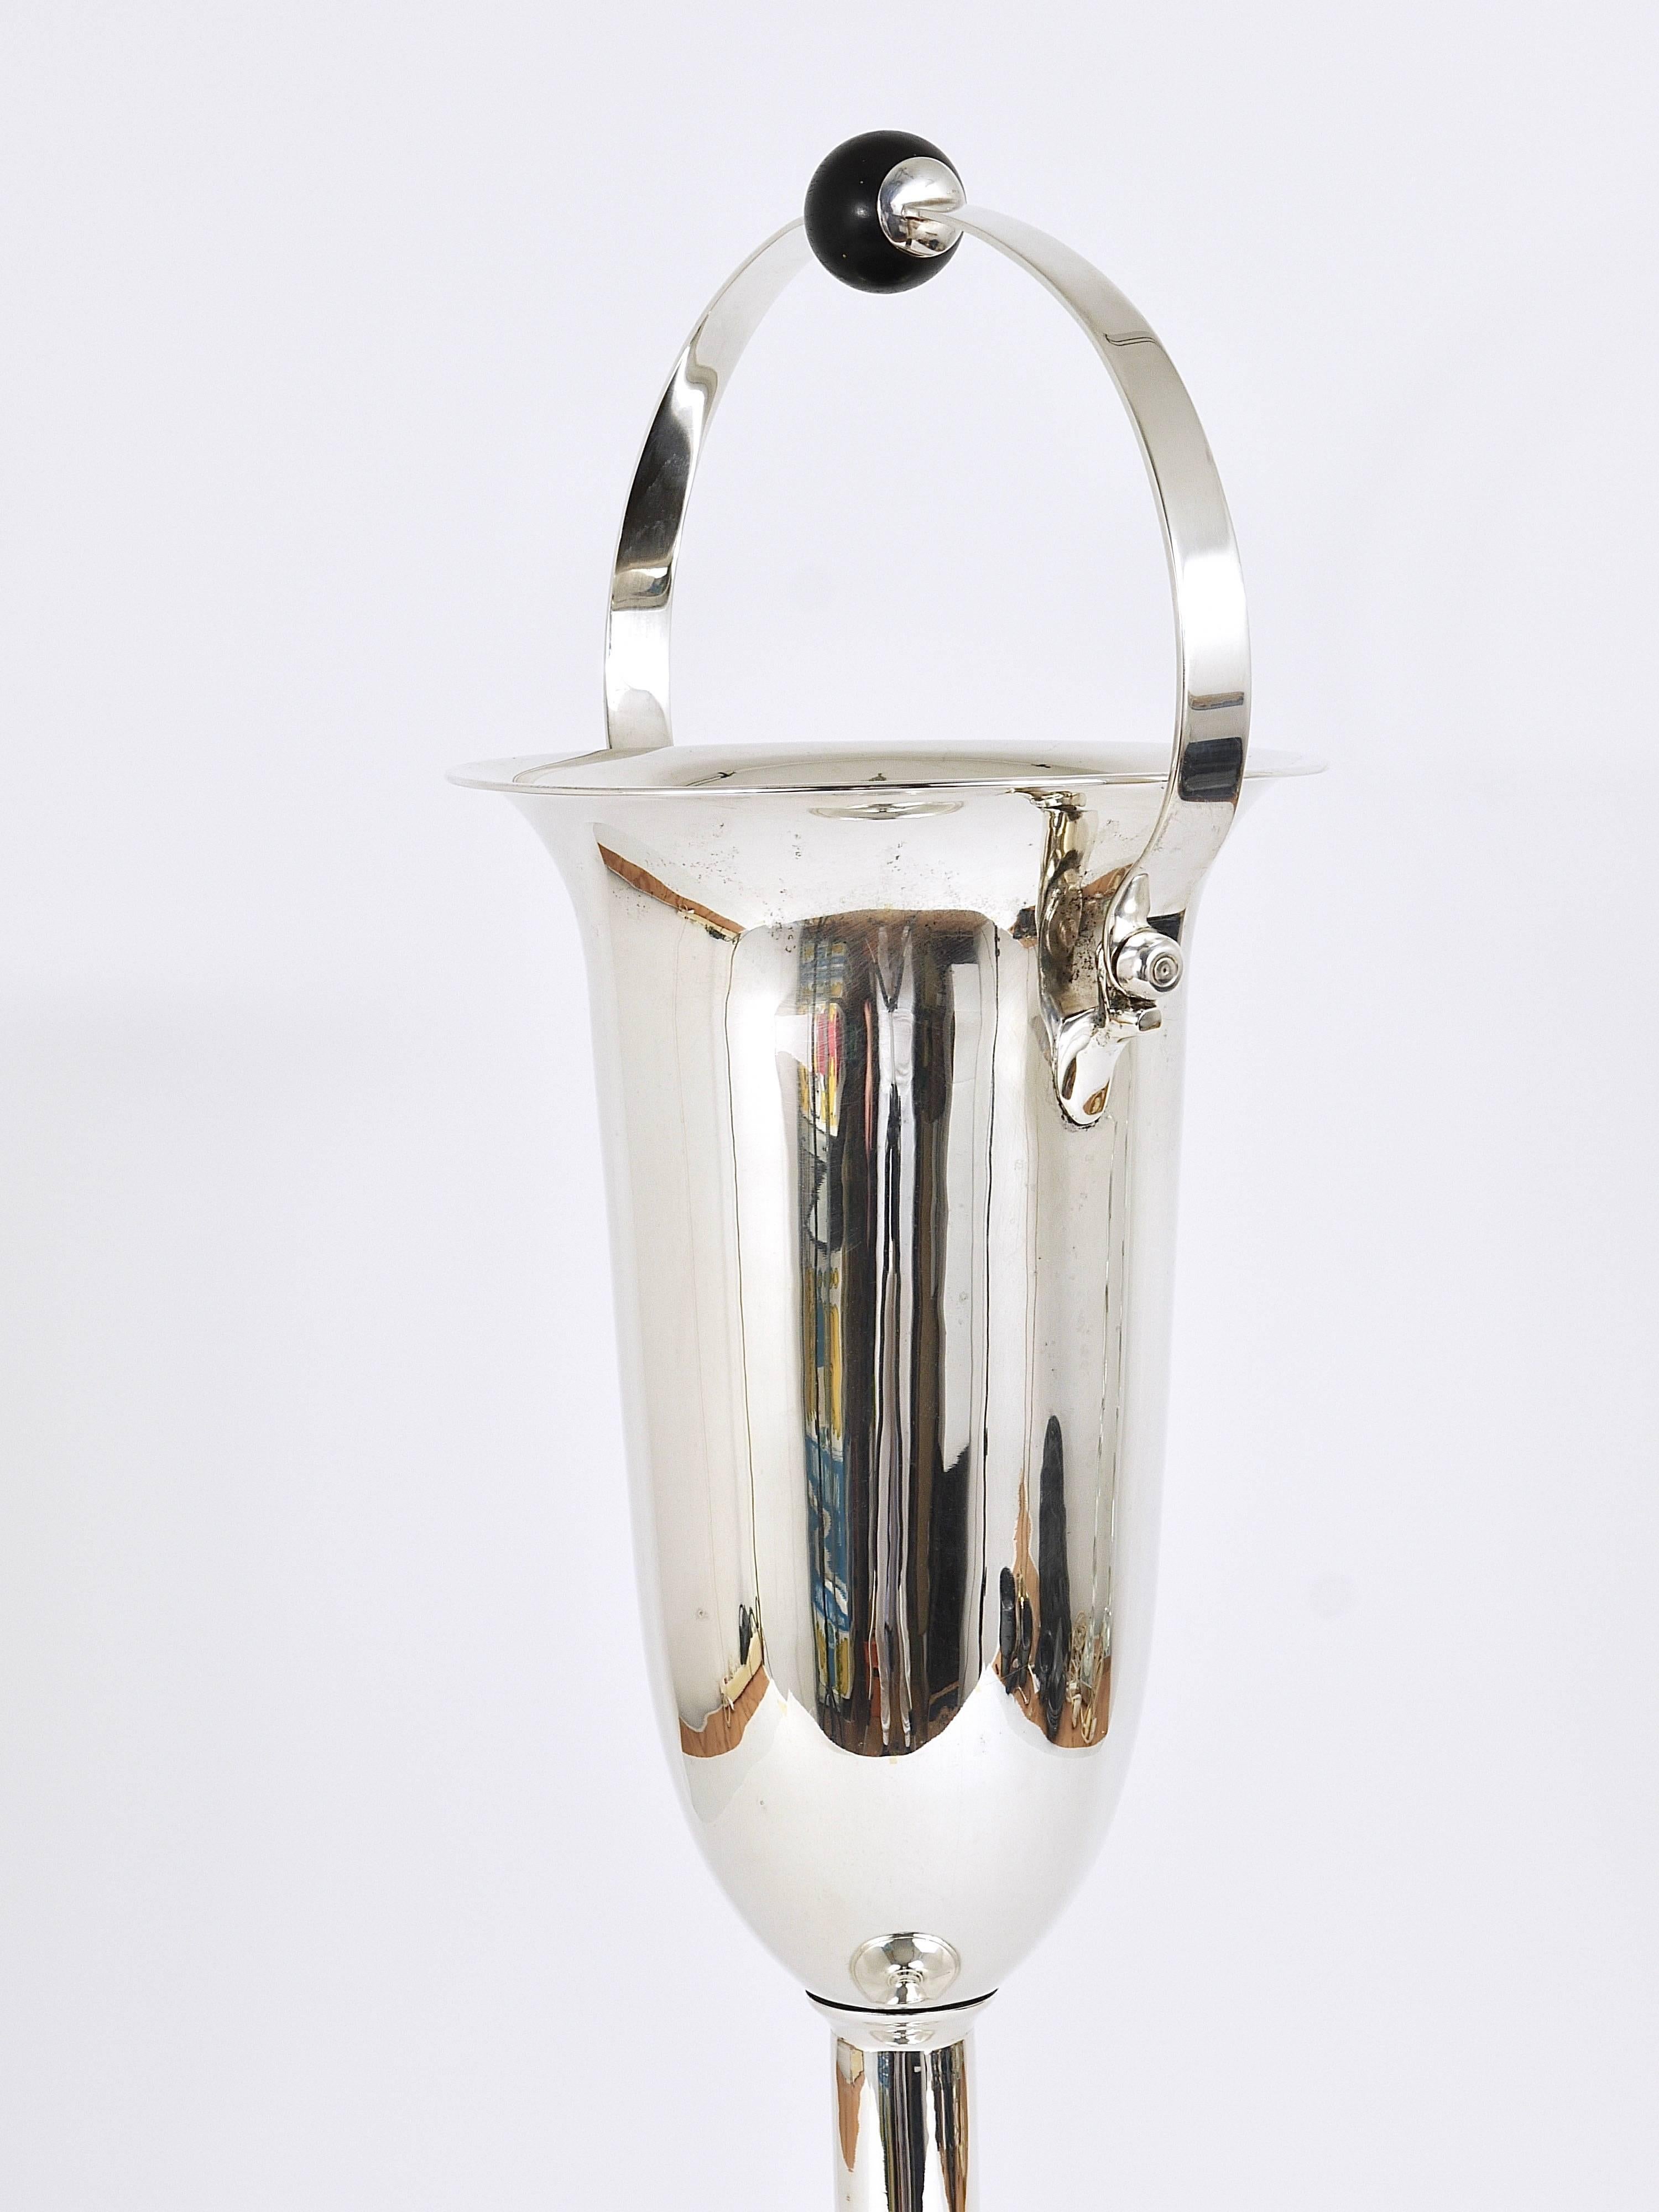 Silvered French Art Deco Floor Standing Wine orChampagne Cooler Ice Bucket, Silver, 1930s